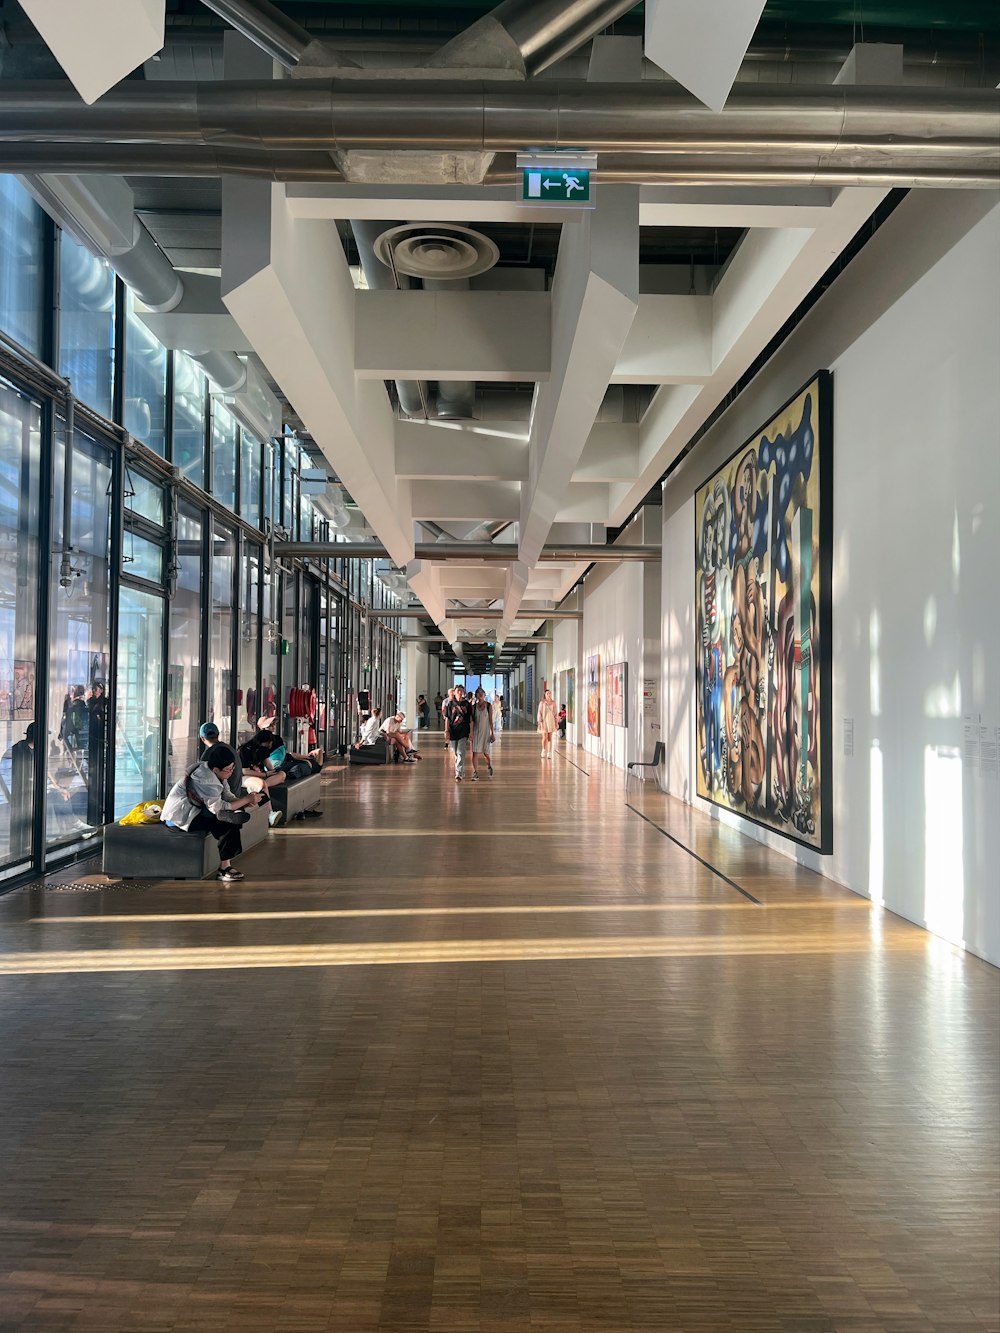 a long hallway with lots of windows and people sitting on benches